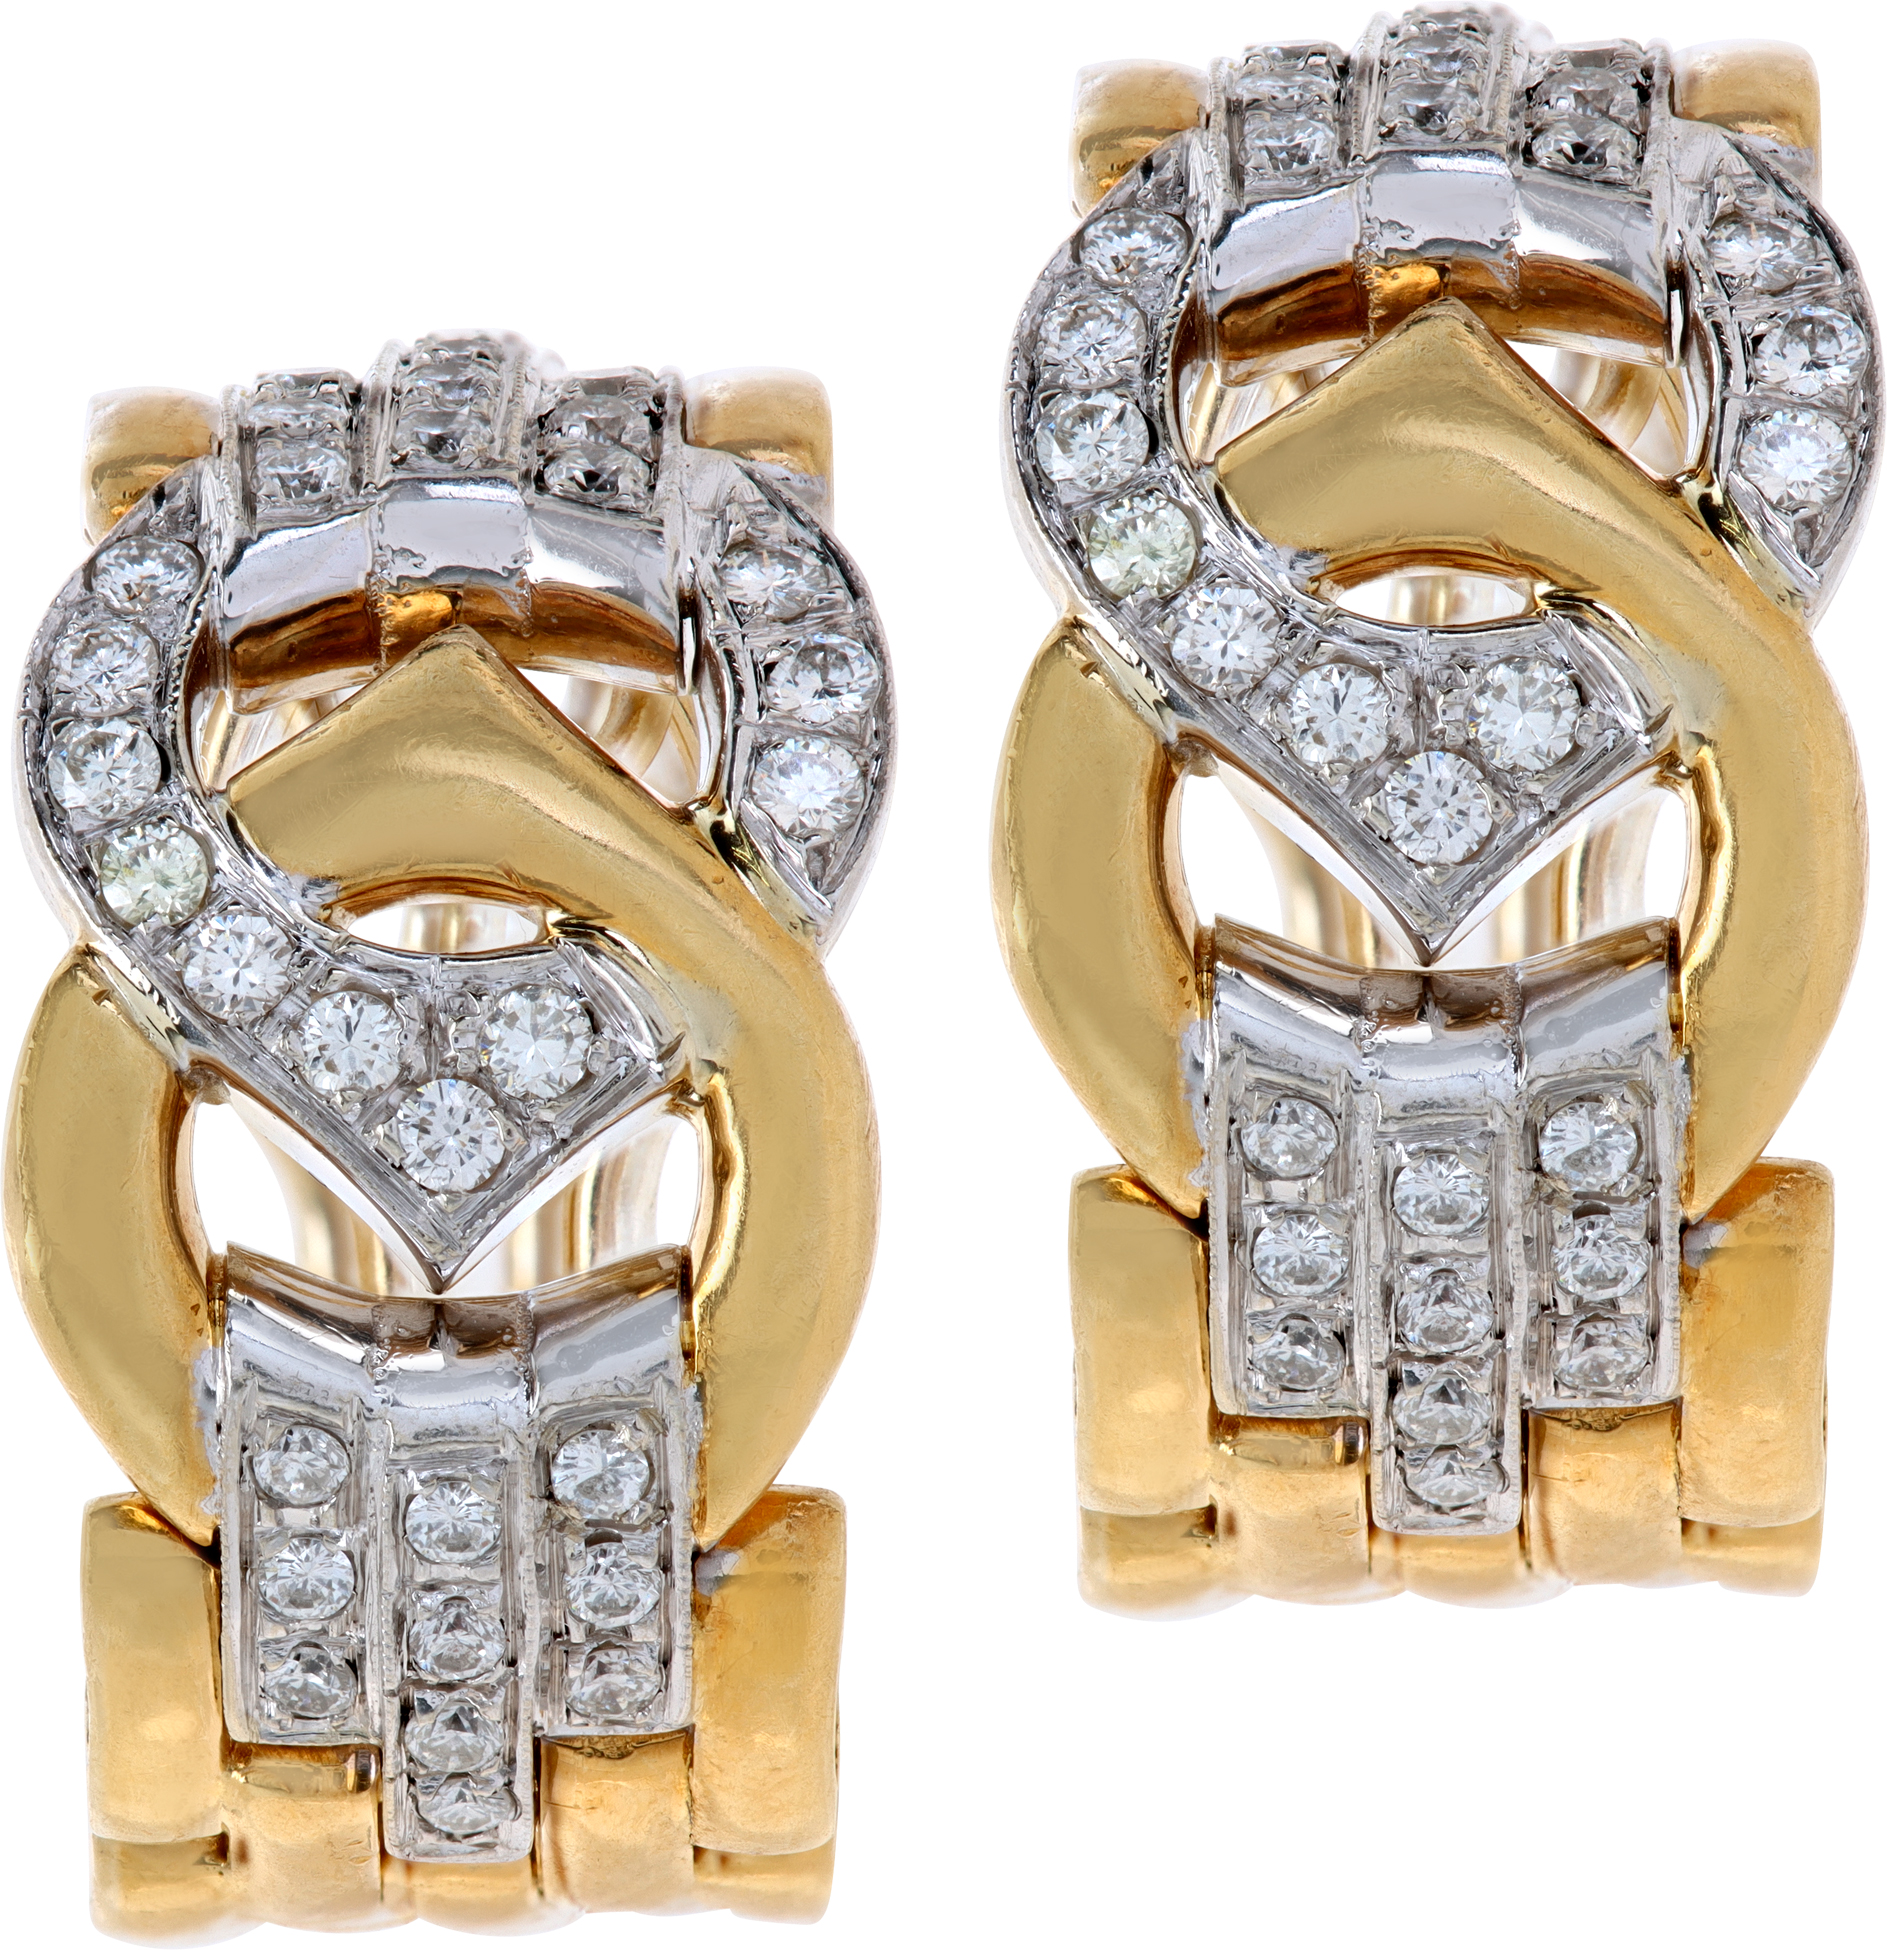 Diamond earrings in 18k white & yellow gold with approximately 0.50 carats in diamonds.